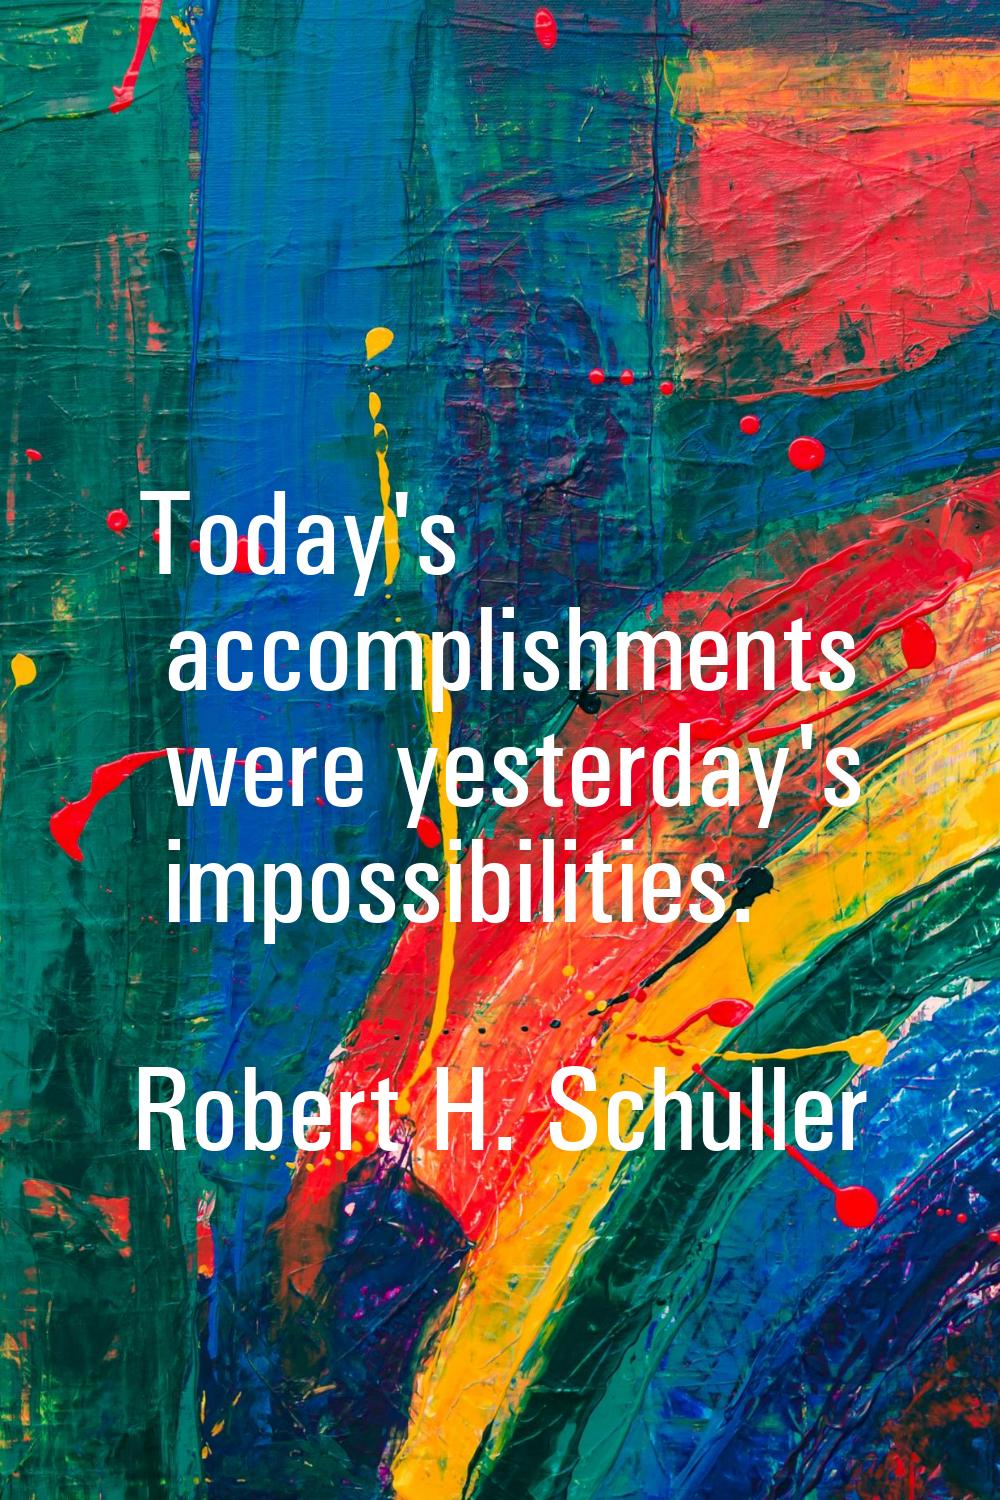 Today's accomplishments were yesterday's impossibilities.